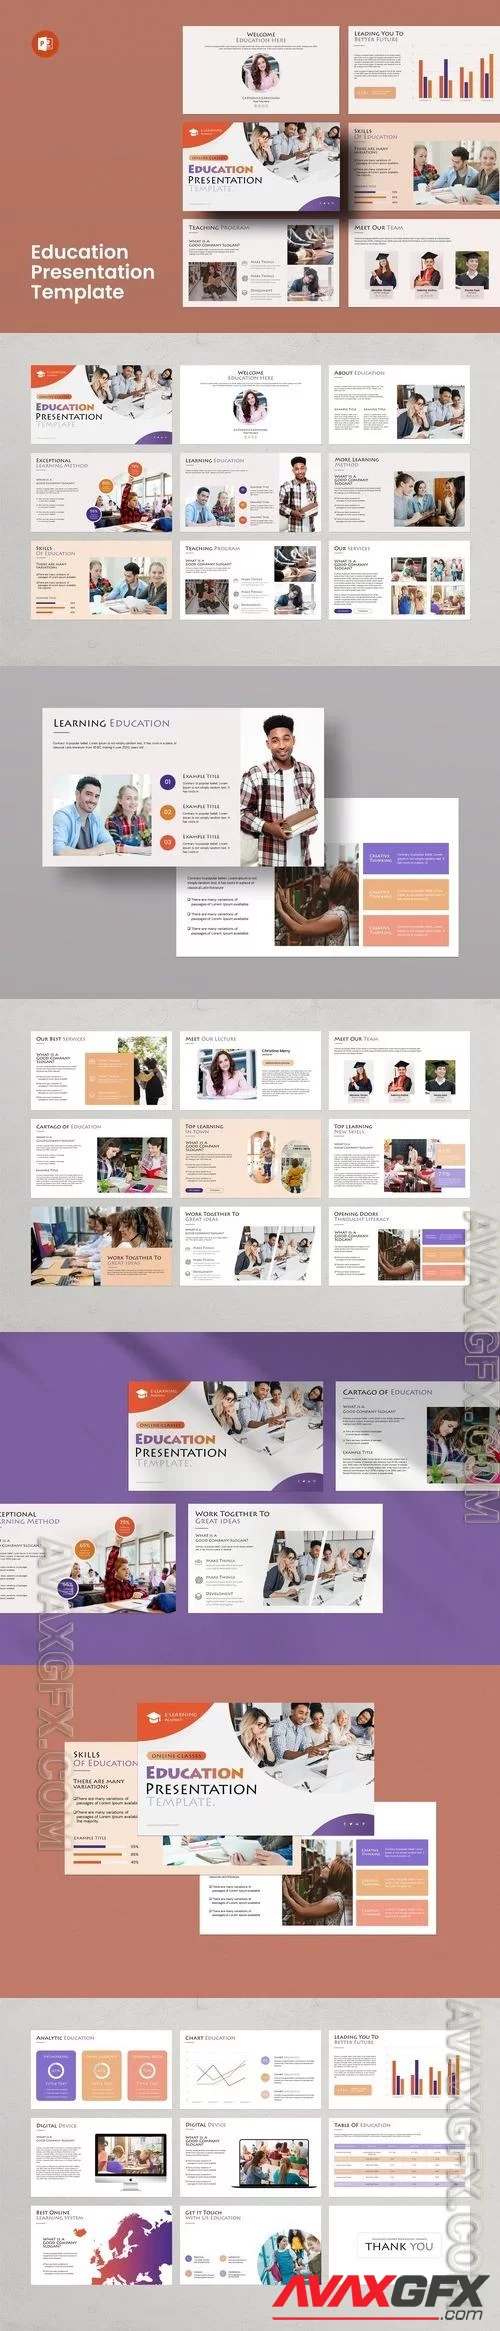 Education - PowerPoint Template RAUSUWD [PPTX]